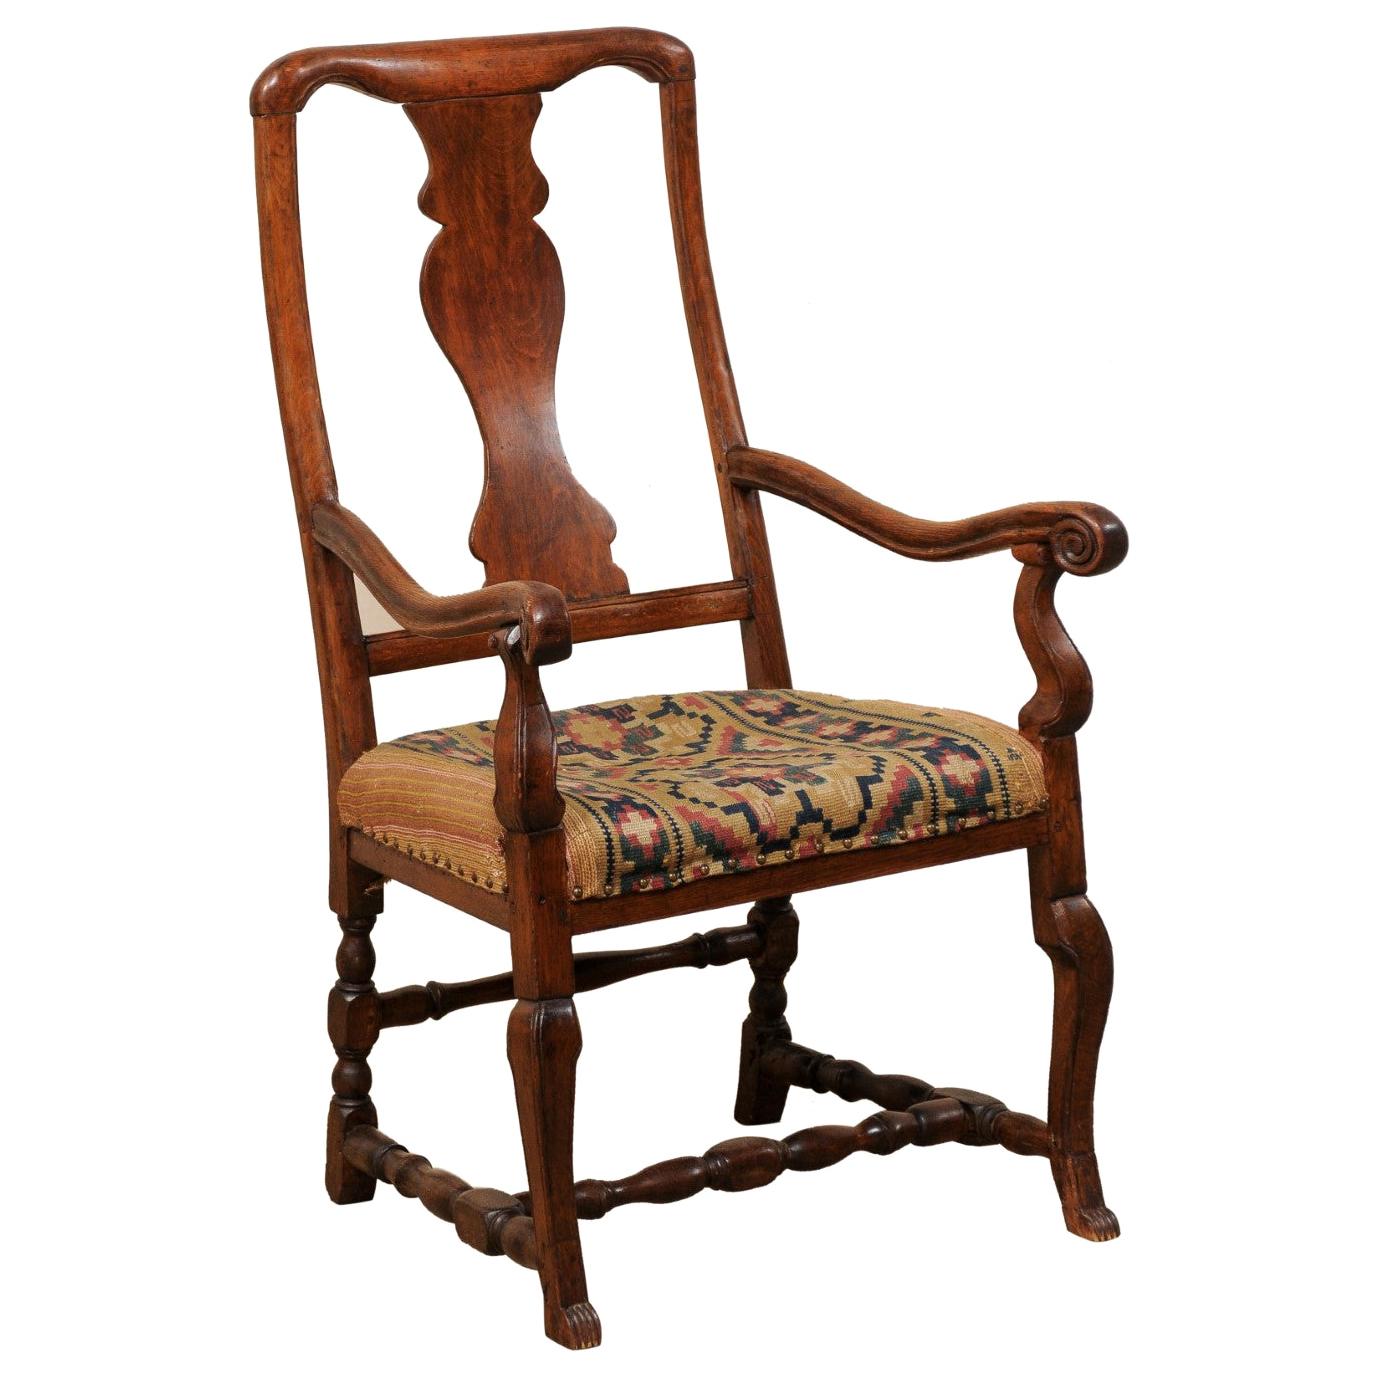 Swedish Period Rococo Armchair with Handwoven Allmoge Textile Seat For Sale